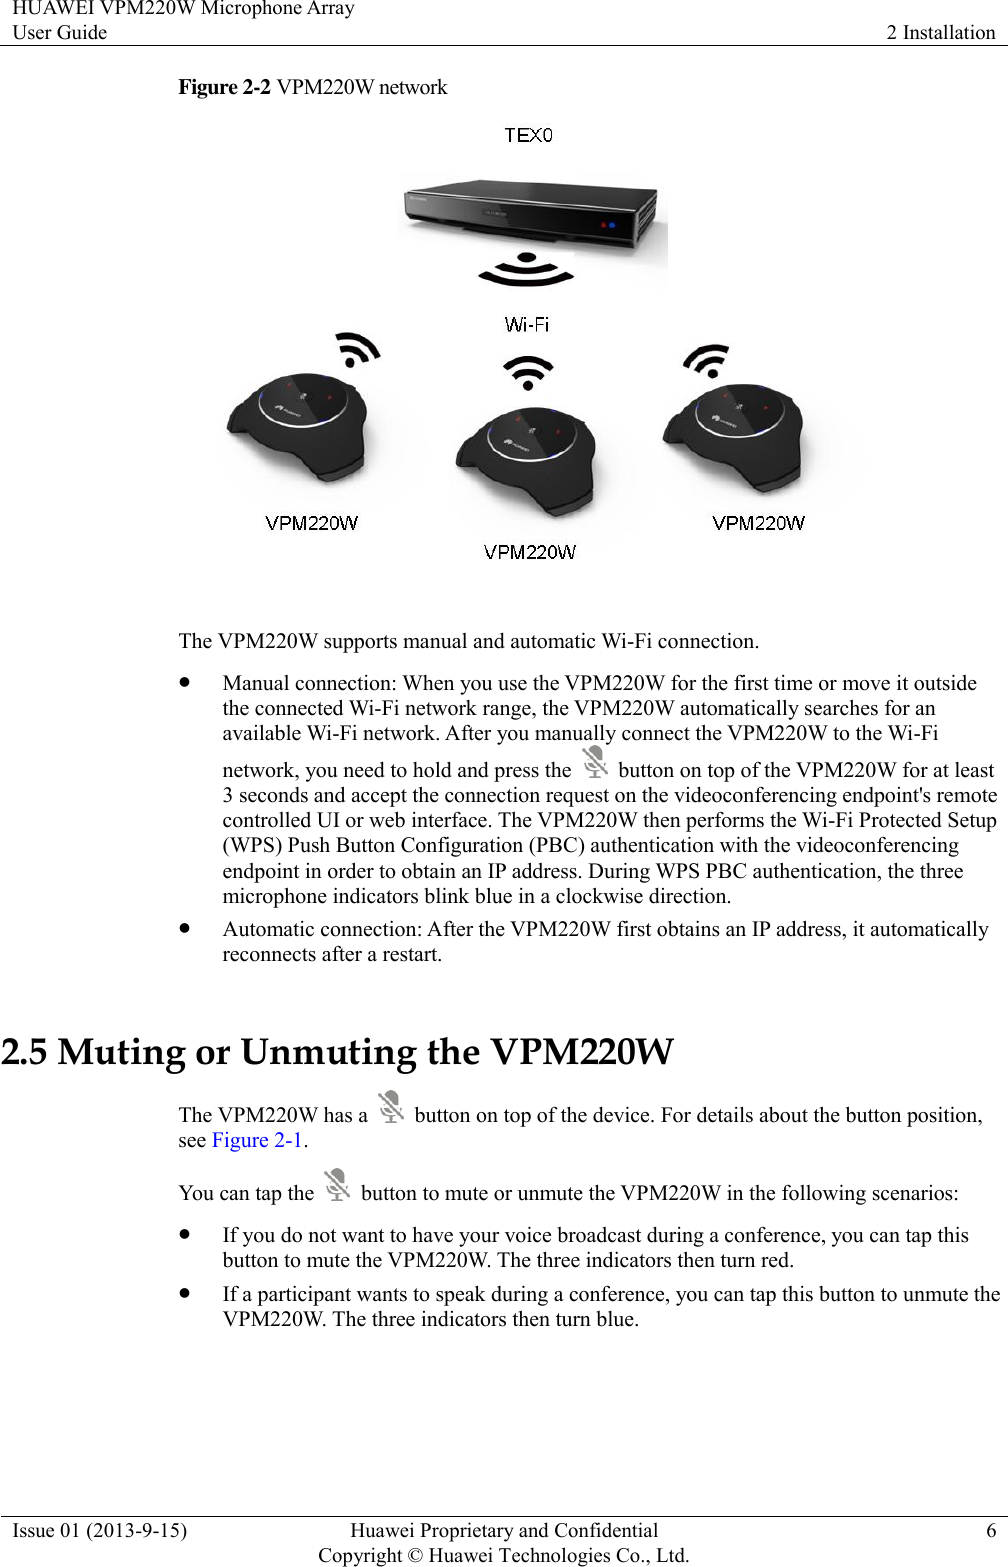 HUAWEI VPM220W Microphone Array User Guide 2 Installation  Issue 01 (2013-9-15) Huawei Proprietary and Confidential                                     Copyright © Huawei Technologies Co., Ltd. 6  Figure 2-2 VPM220W network   The VPM220W supports manual and automatic Wi-Fi connection.  Manual connection: When you use the VPM220W for the first time or move it outside the connected Wi-Fi network range, the VPM220W automatically searches for an available Wi-Fi network. After you manually connect the VPM220W to the Wi-Fi network, you need to hold and press the    button on top of the VPM220W for at least 3 seconds and accept the connection request on the videoconferencing endpoint&apos;s remote controlled UI or web interface. The VPM220W then performs the Wi-Fi Protected Setup (WPS) Push Button Configuration (PBC) authentication with the videoconferencing endpoint in order to obtain an IP address. During WPS PBC authentication, the three microphone indicators blink blue in a clockwise direction.  Automatic connection: After the VPM220W first obtains an IP address, it automatically reconnects after a restart. 2.5 Muting or Unmuting the VPM220W The VPM220W has a    button on top of the device. For details about the button position, see Figure 2-1. You can tap the    button to mute or unmute the VPM220W in the following scenarios:  If you do not want to have your voice broadcast during a conference, you can tap this button to mute the VPM220W. The three indicators then turn red.  If a participant wants to speak during a conference, you can tap this button to unmute the VPM220W. The three indicators then turn blue. 